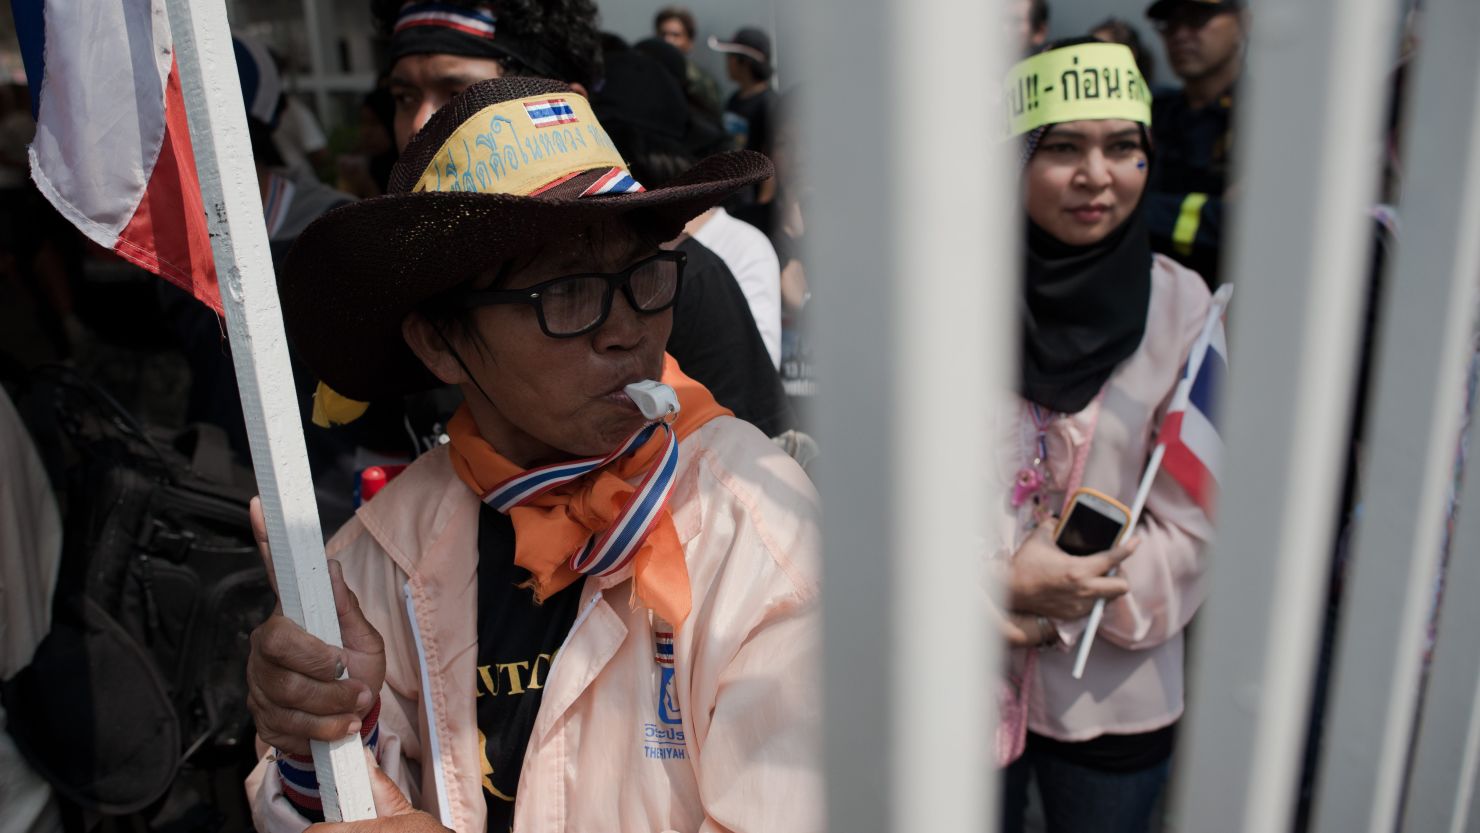 Thai anti-government protesters shut down a polling station at the Srieam Anusorn school in Bangkok on January 26, 2014.